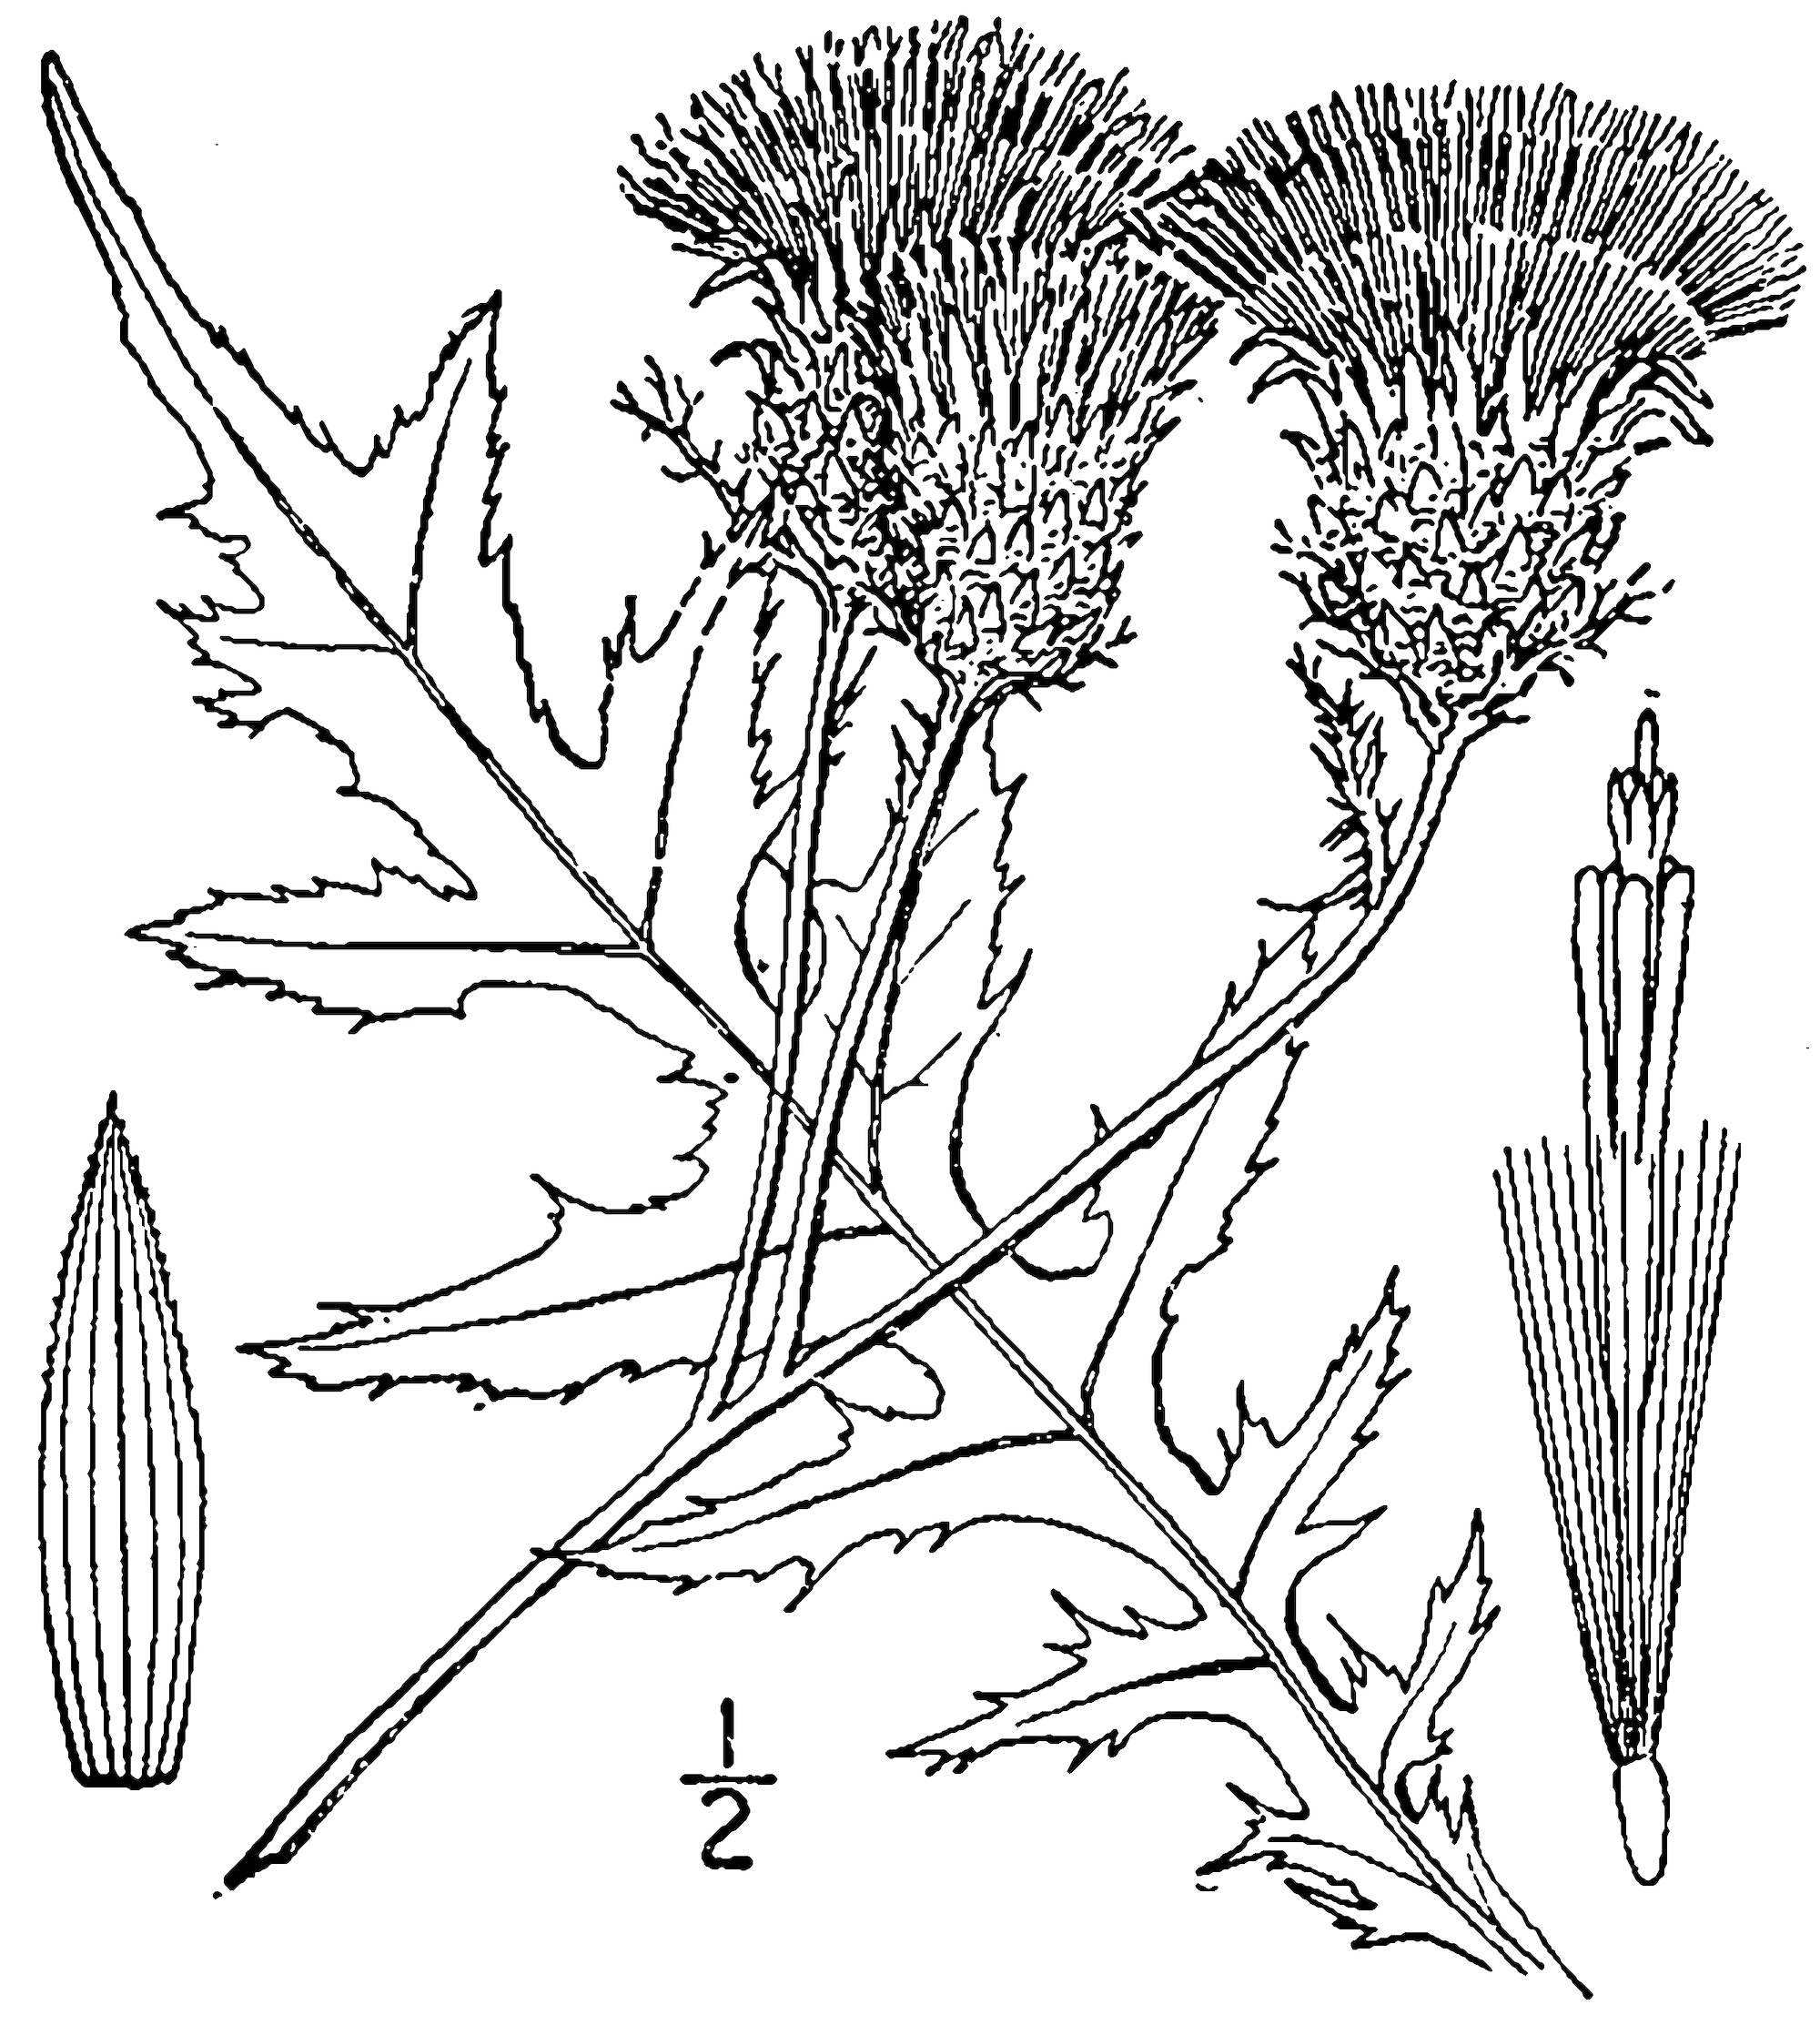 1913 Swamp Thistle drawing.